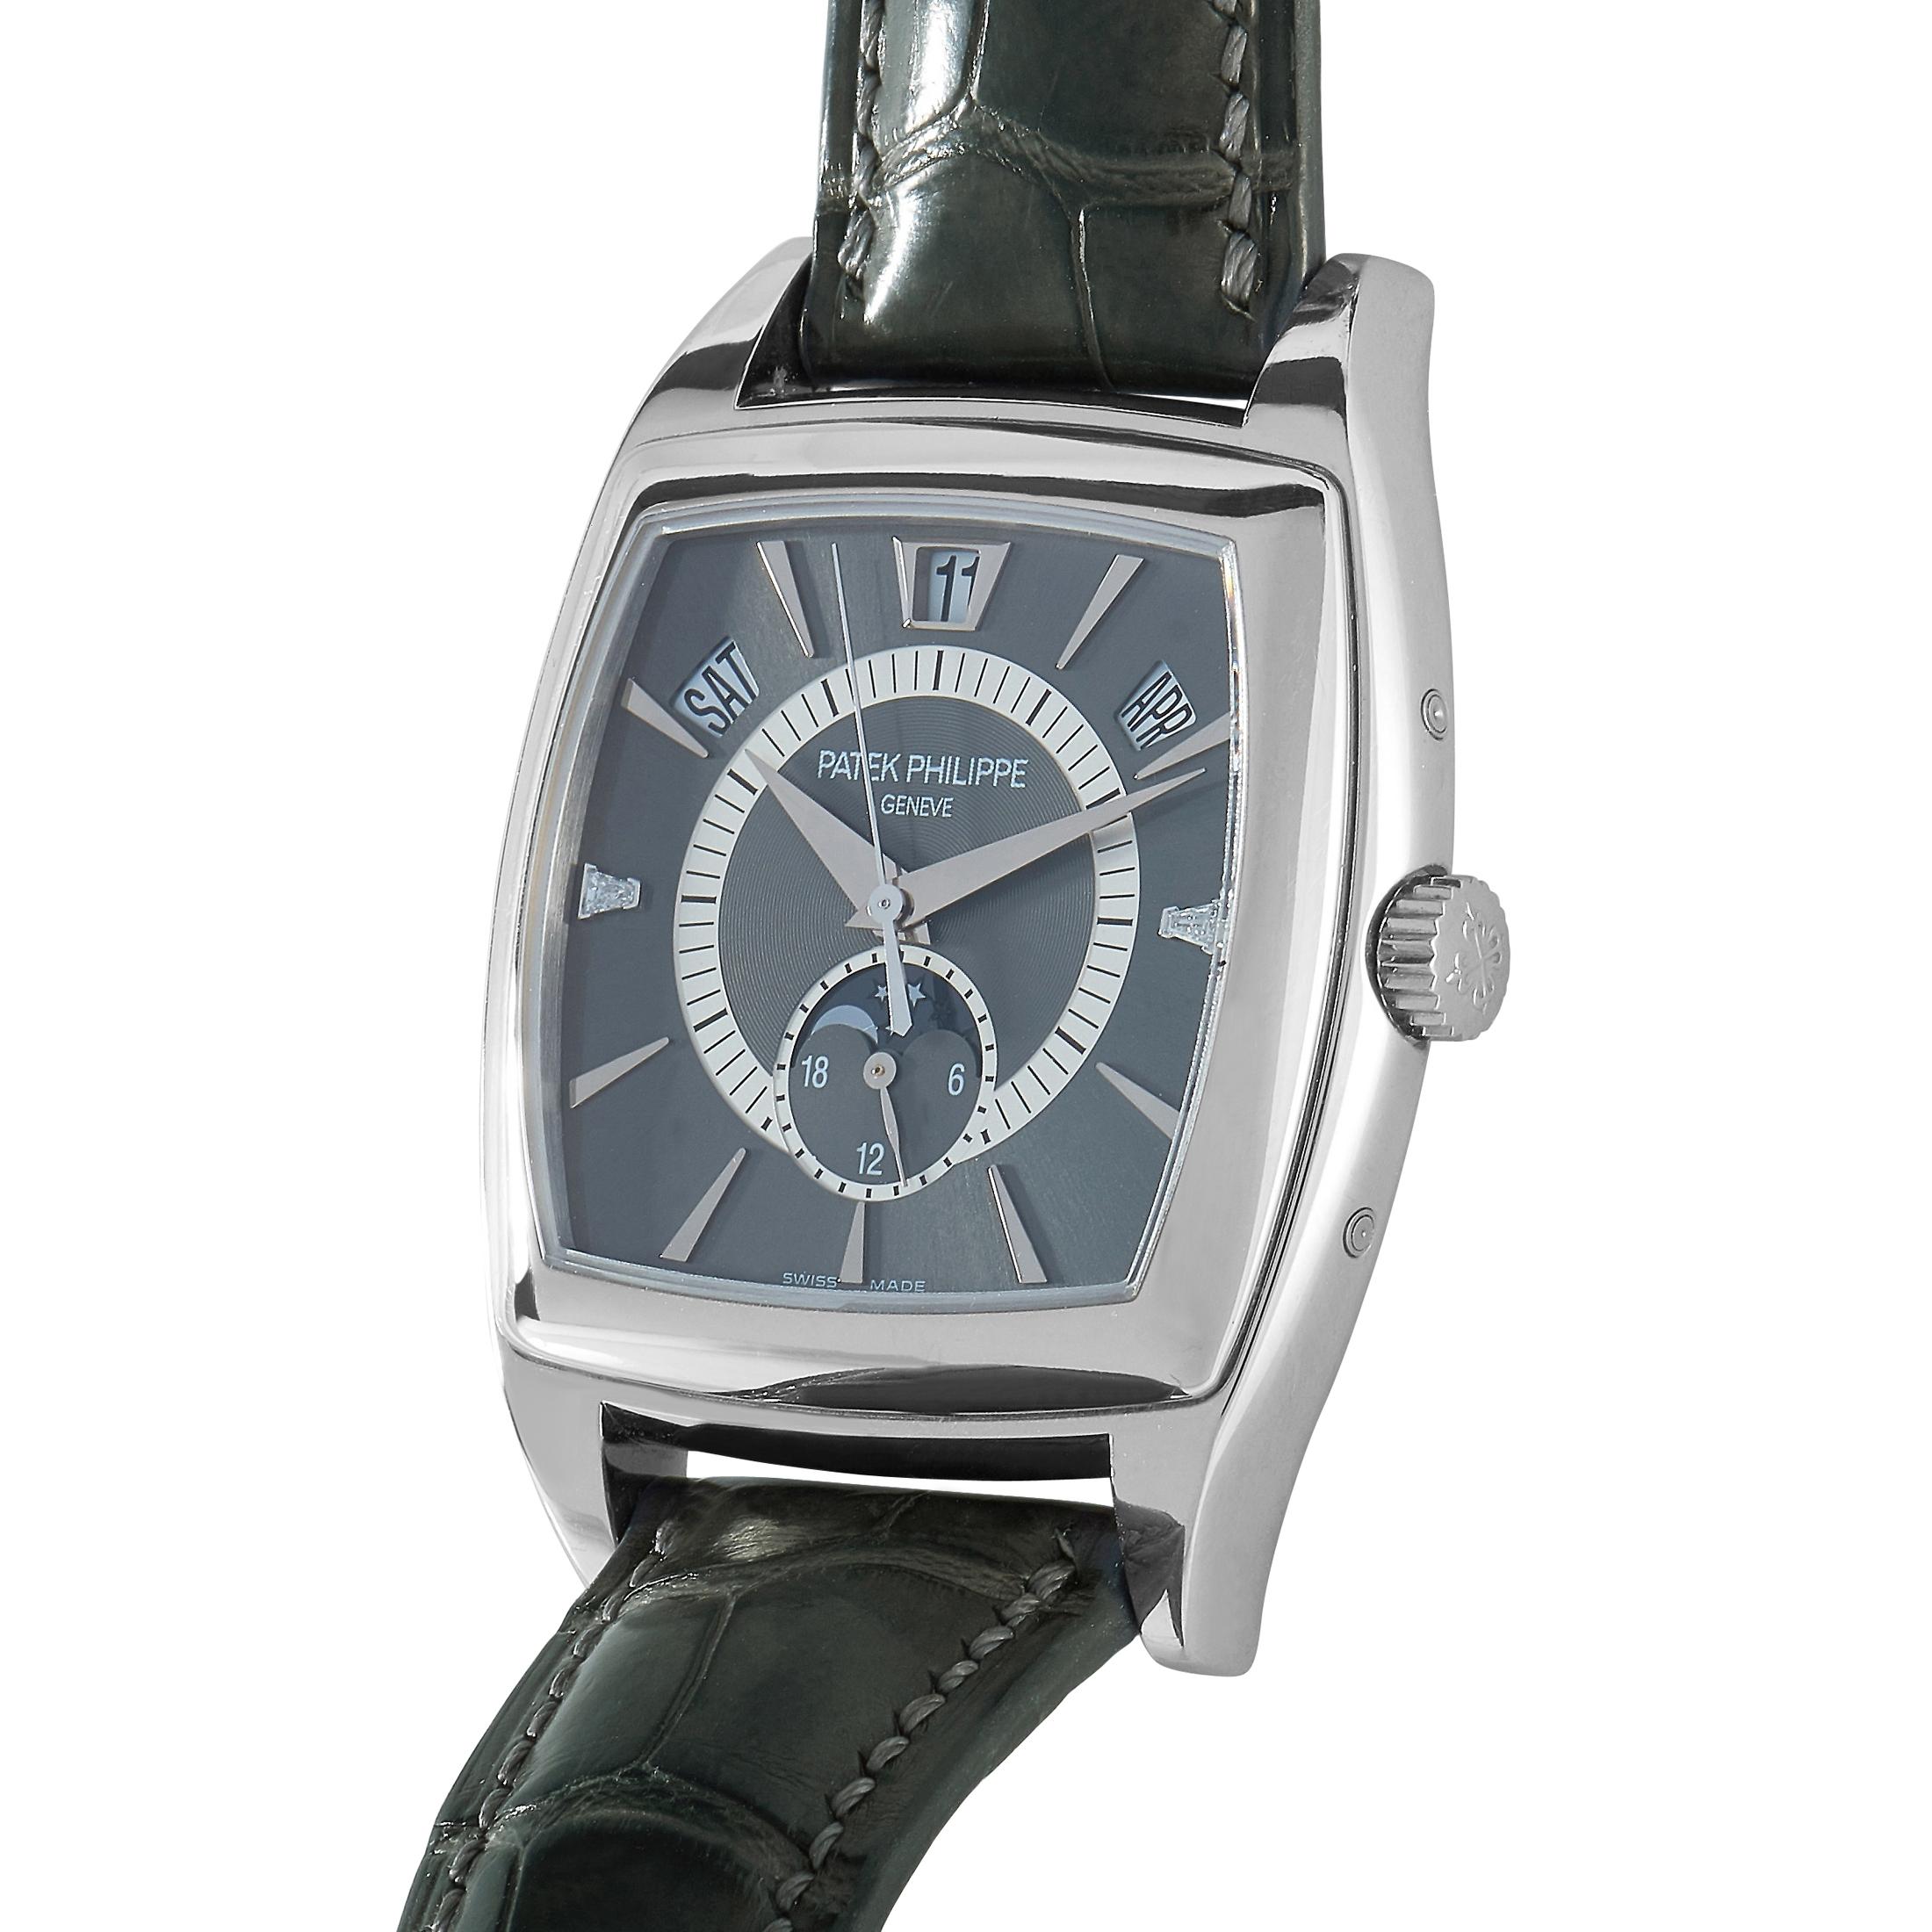 The Patek Philippe Gondolo Calendario, reference number 5135P-001, is a member of the renowned “Gondolo” collection.

The watch is presented with a platinum case that boasts see-through back. The case is mounted onto a gray leather strap fitted with